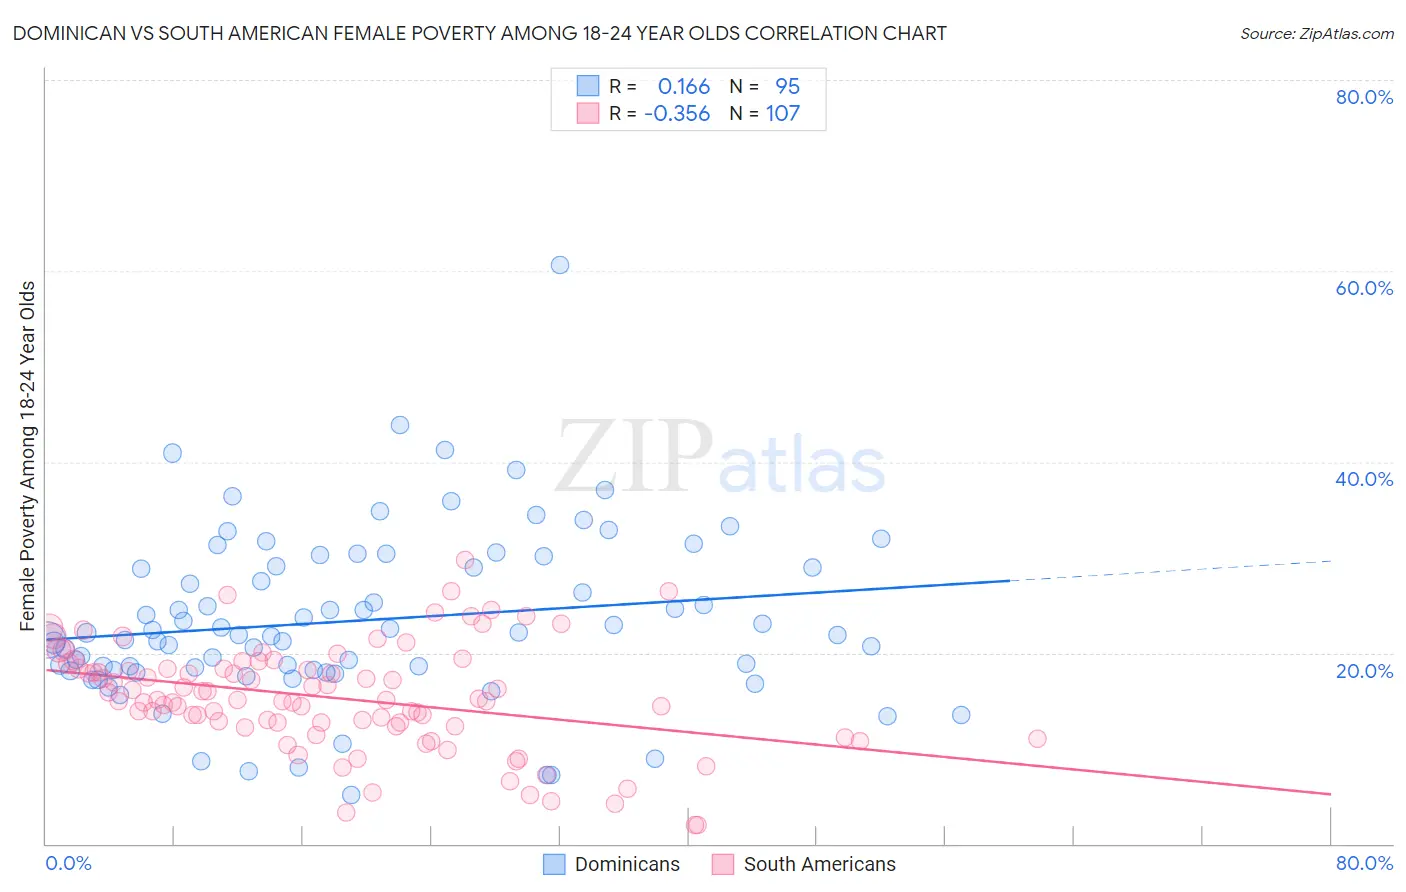 Dominican vs South American Female Poverty Among 18-24 Year Olds